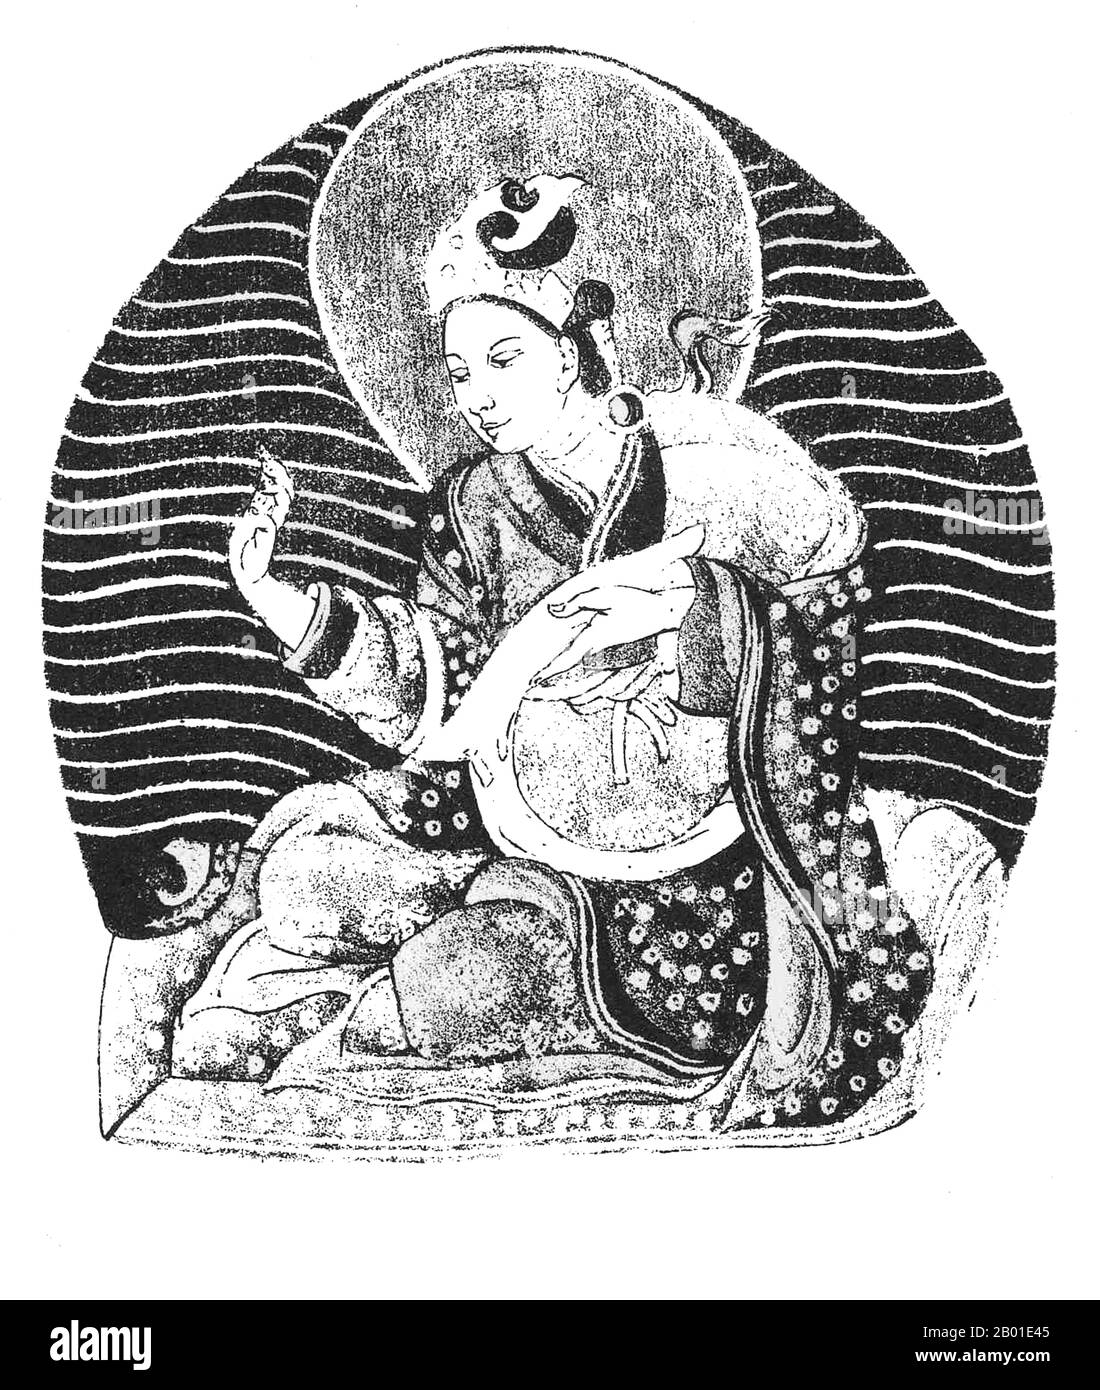 Manjushrí Kírti (Tib. Rigdan Tagpa) is said to have been born in 159 BCE and ruled over Shambhala which had 300,510 followers of the Mlechha (Yavana or 'western') religion living in it, some of whom worshiped the sun.  He is said to have expelled all the heretics from his dominions but later, after hearing their petitions, allowed them to return. For their benefit, and the benefit of all living beings, he explained the Kalachakra teachings. In 59 BCE he abdicated his throne to his son, Puṇdaŕika, and died soon afterwards, entering the Sambhoga-káya of Buddhahood. Stock Photo